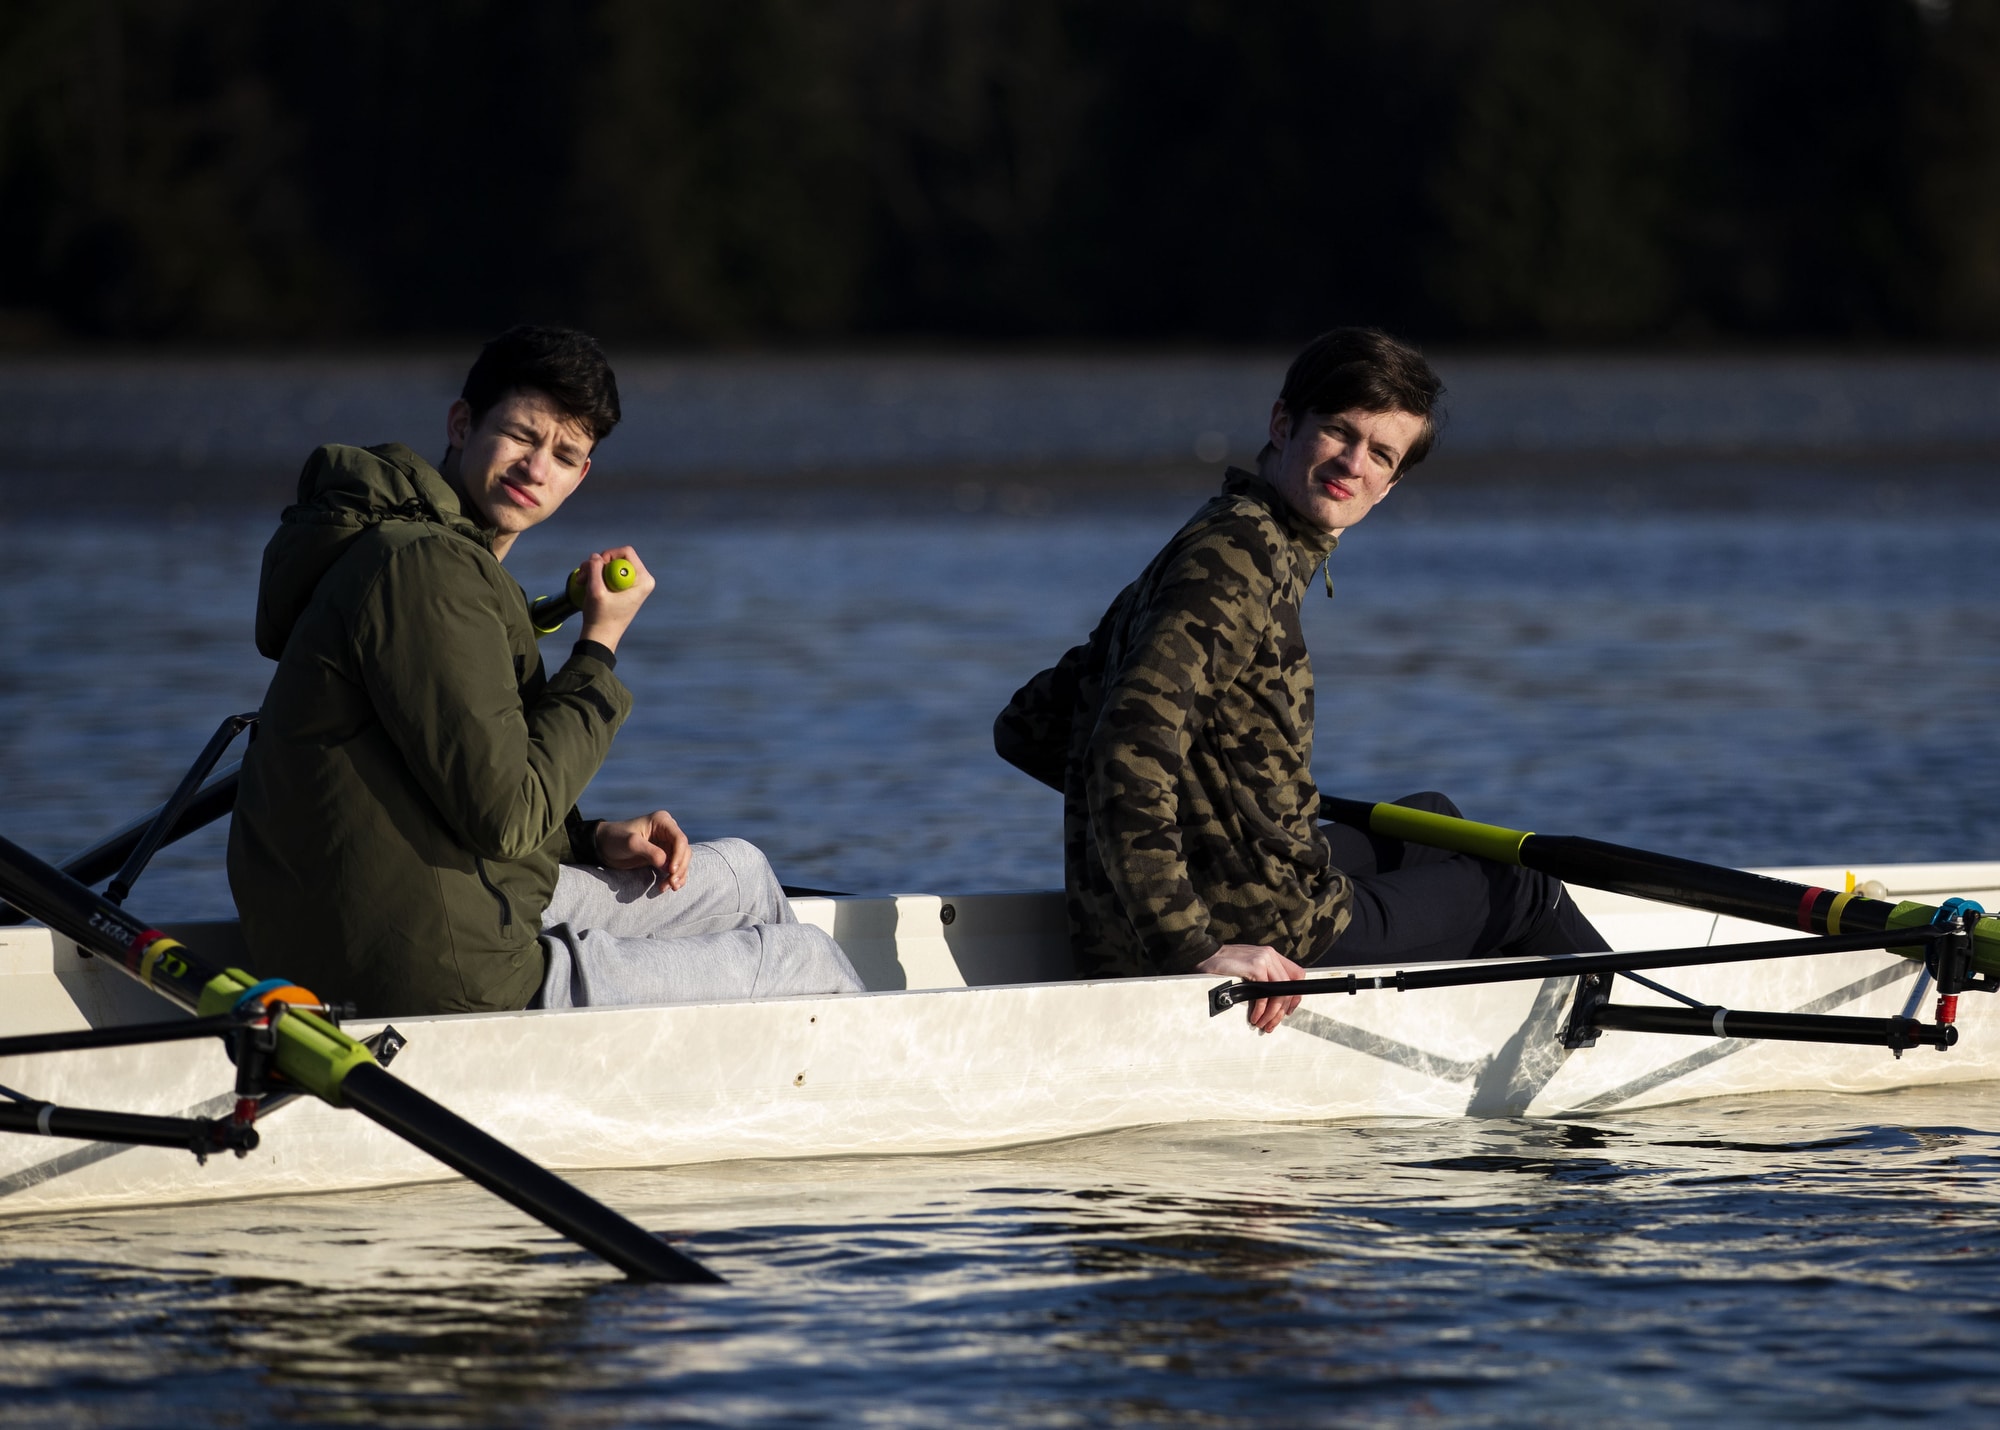 Learn-to-Row Program for Displaced Ukrainian Youth